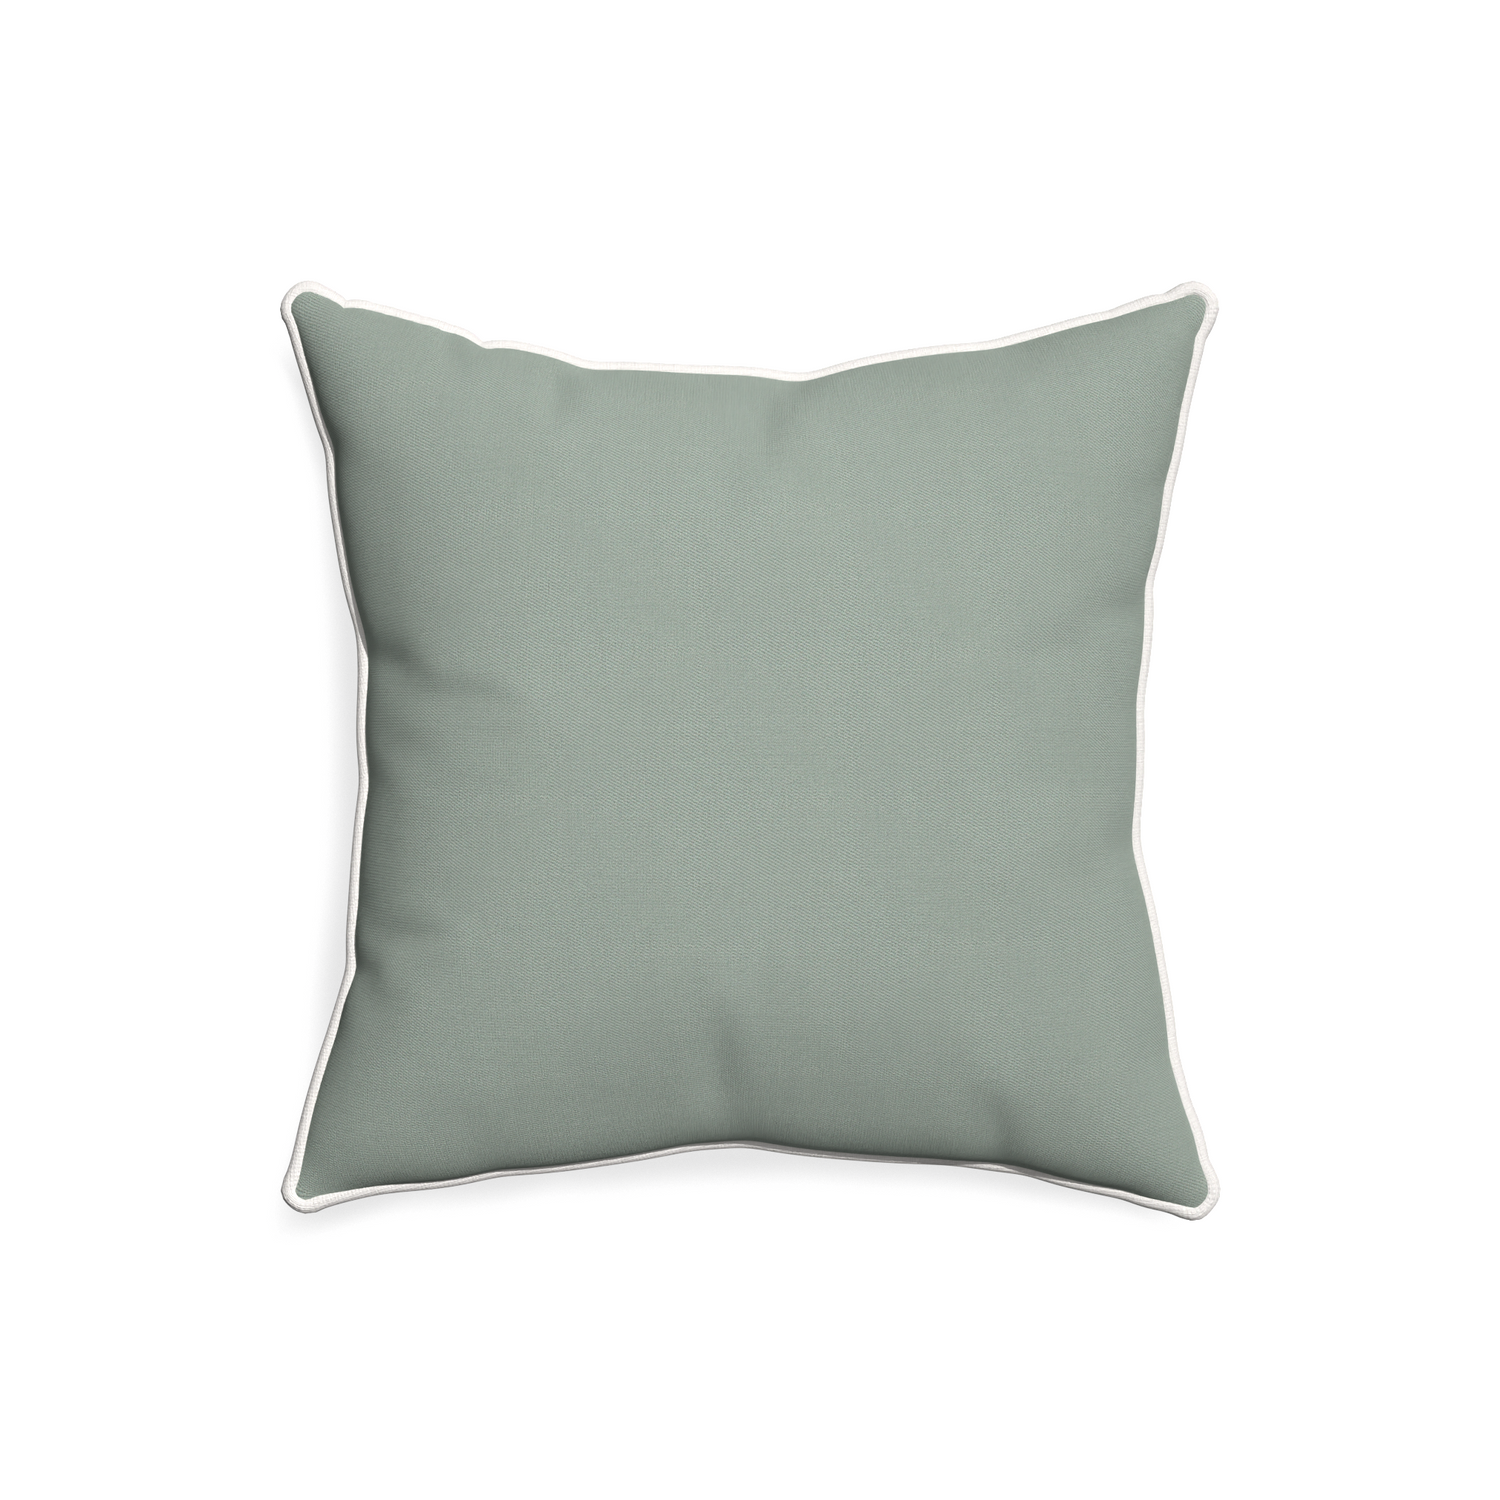 20-square sage custom sage green cottonpillow with snow piping on white background